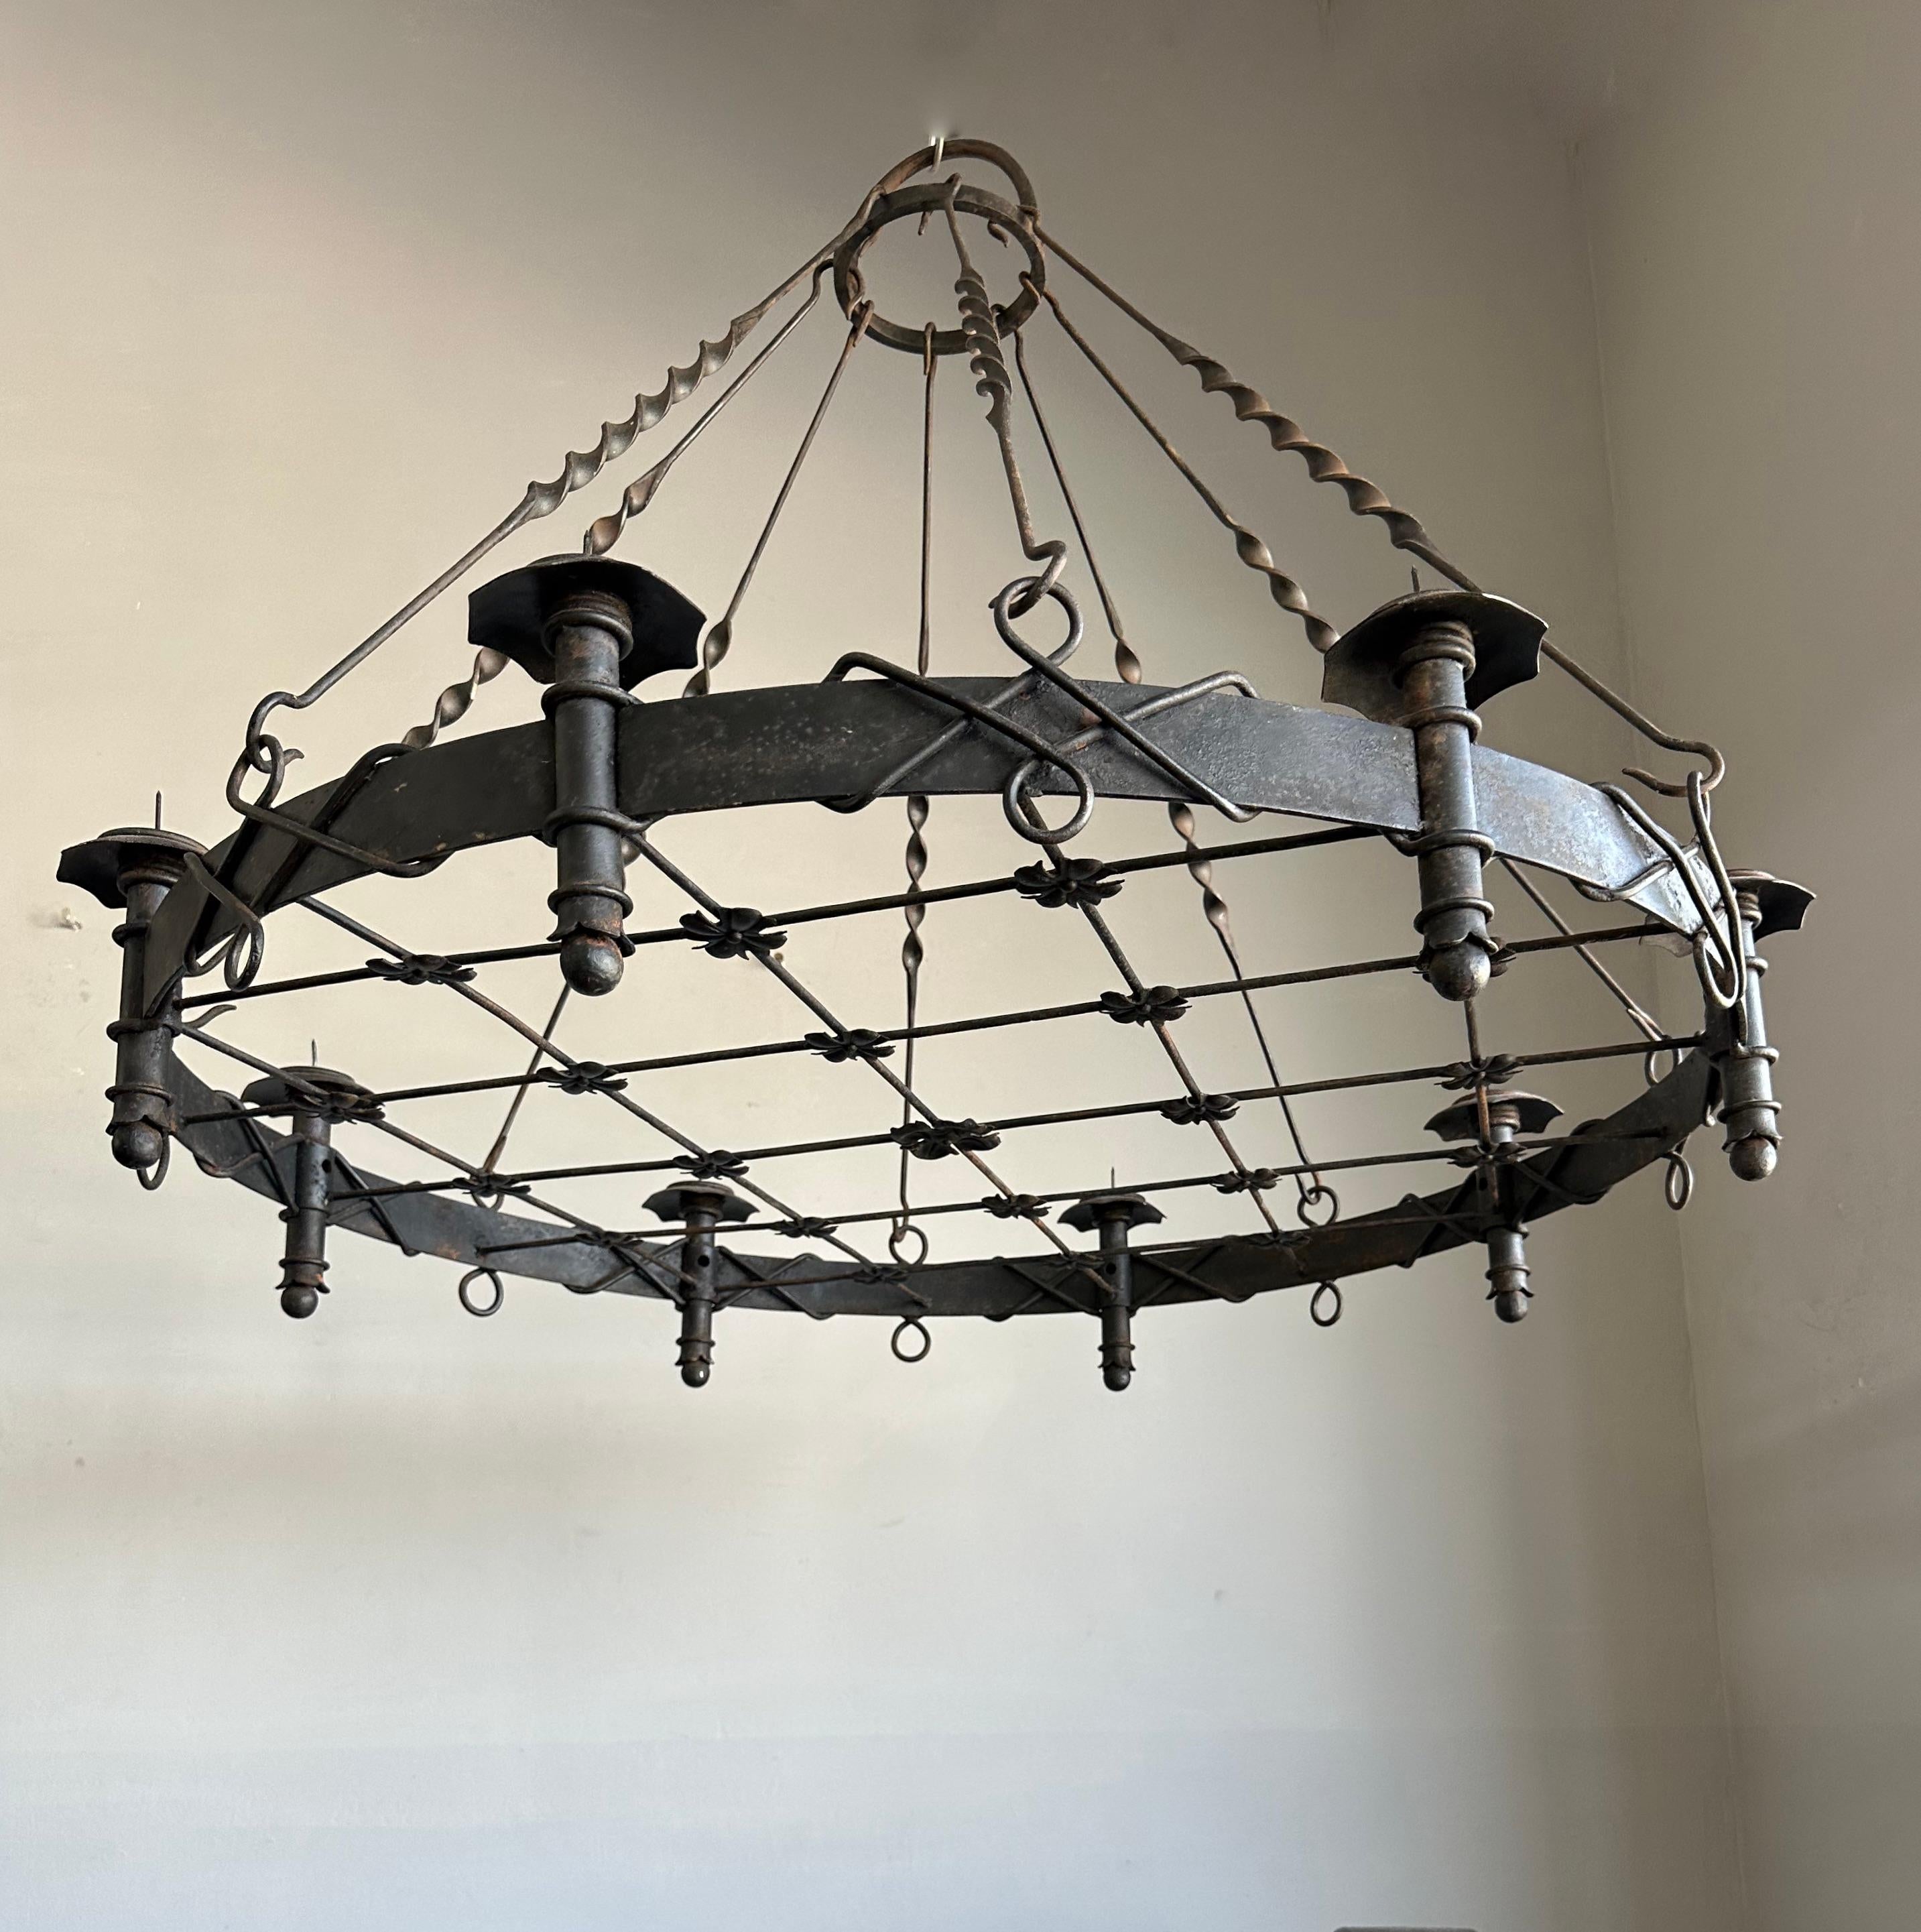 Great quality, forged in fire, castle design candle chandelier / pendant light.

This finer quality and all hand-forged, eight-light chandelier comes with some really beautiful details (including the stunning, turned metal rod-chain) that certainly